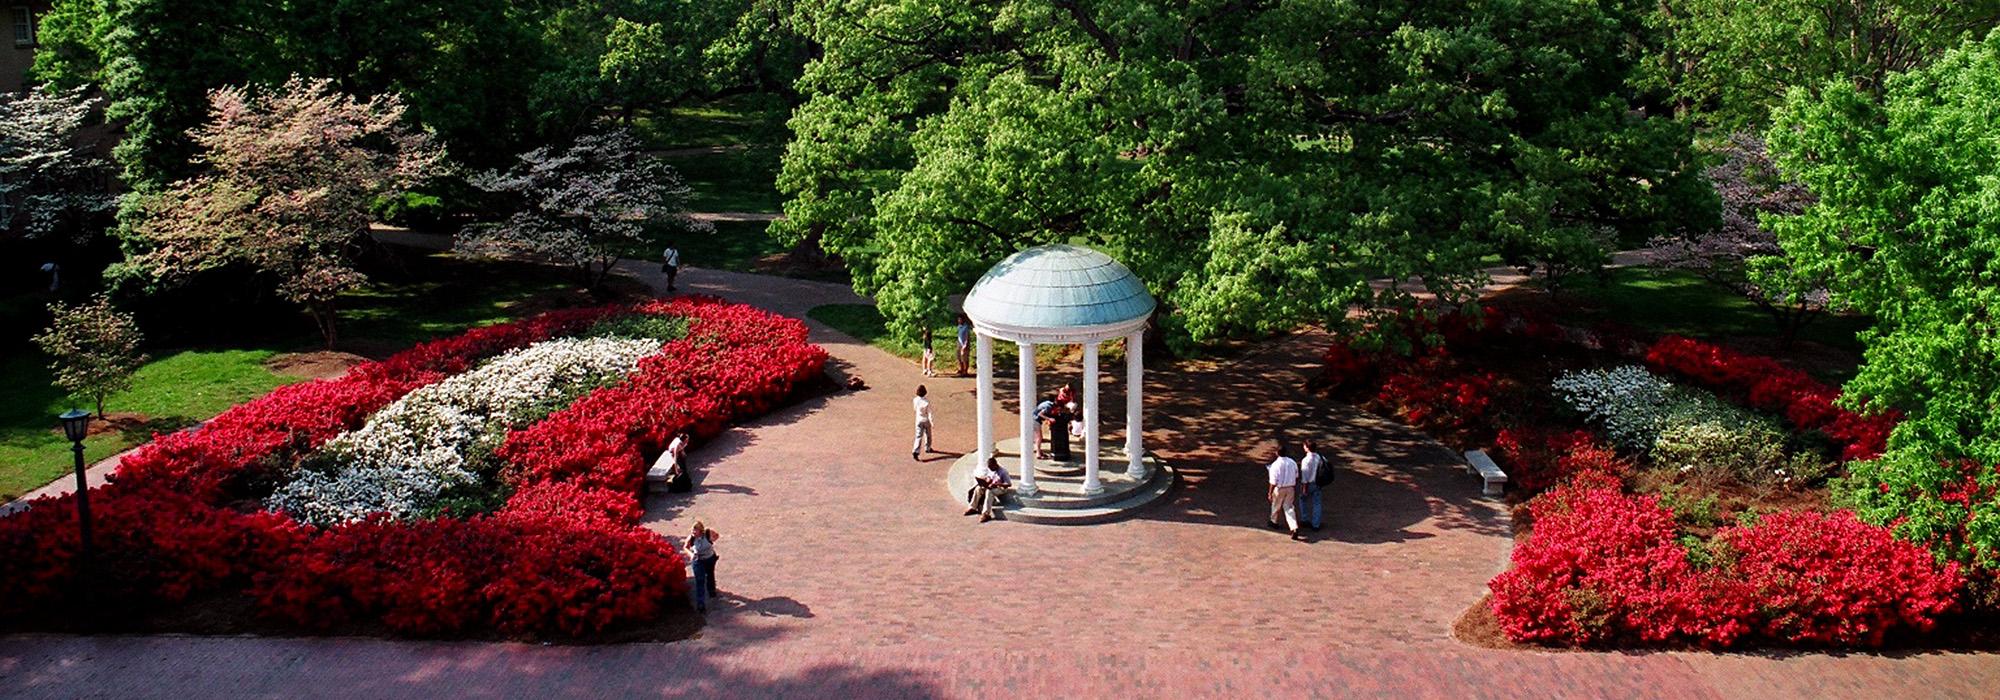 Raleigh Durham The Cultural Landscape, Landscaping Chapel Hill